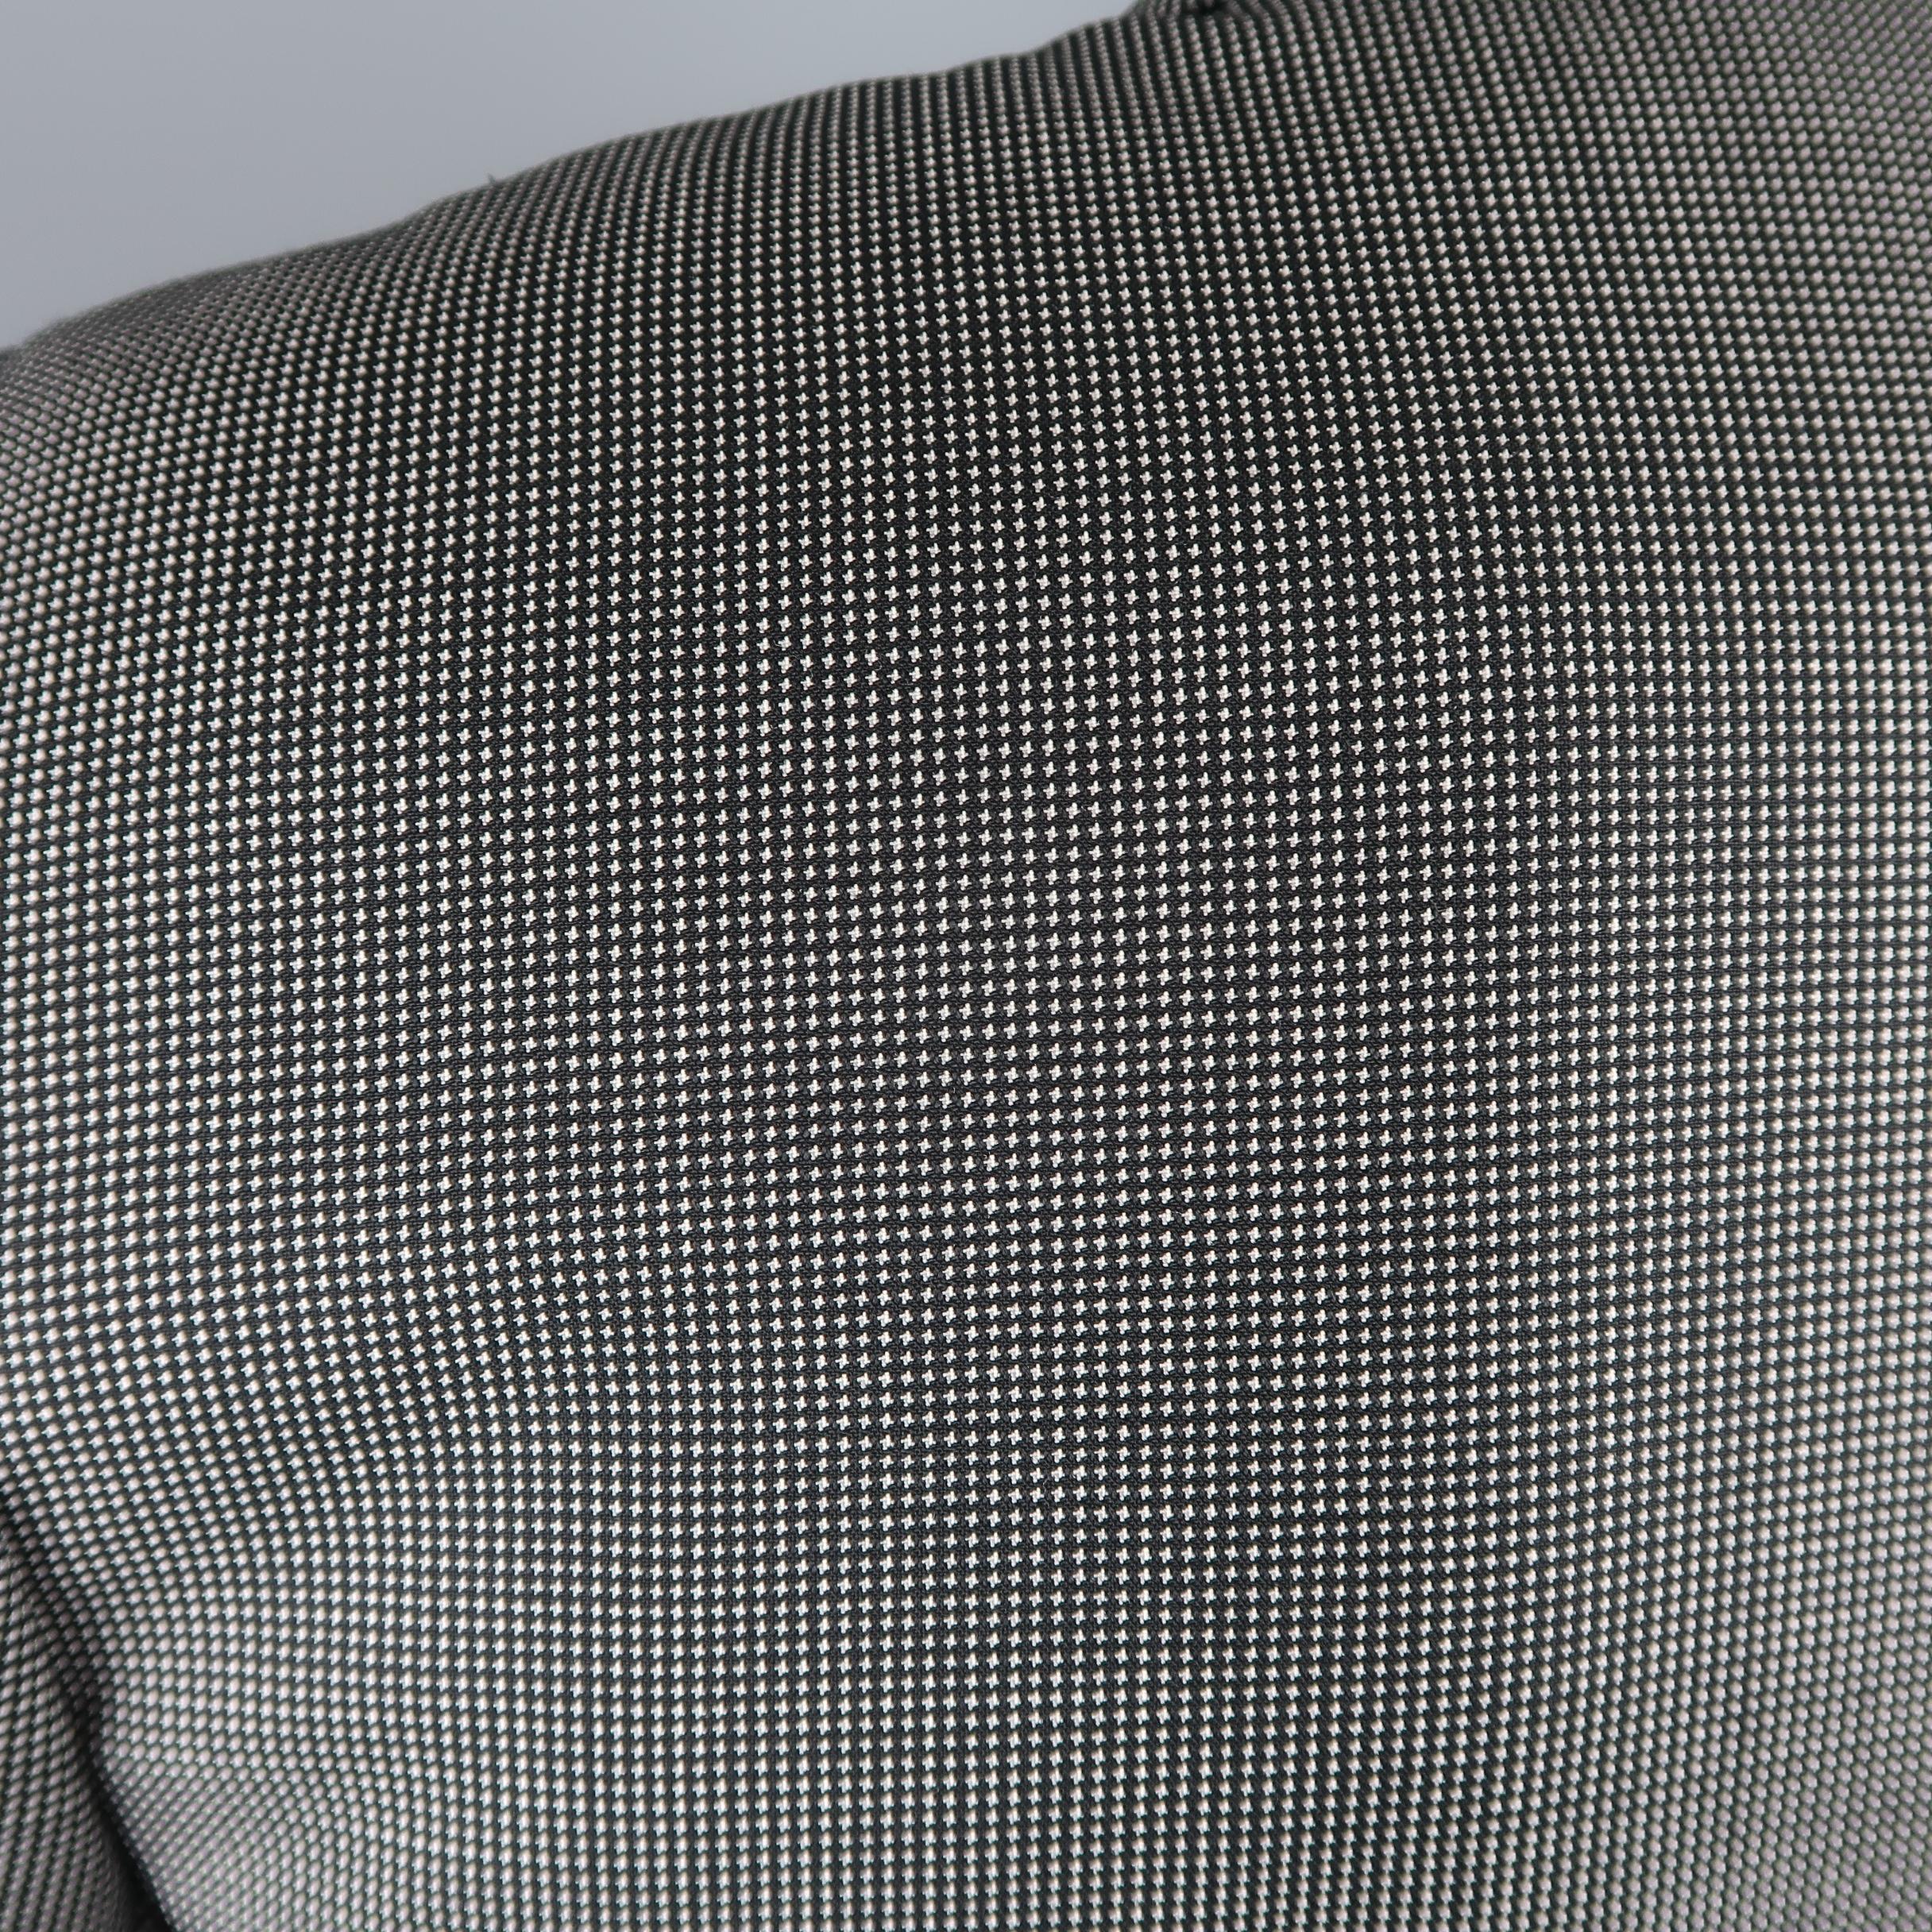 CANALI 42 Regular Black and White Nailhead Wool Single Breasted Suit ...